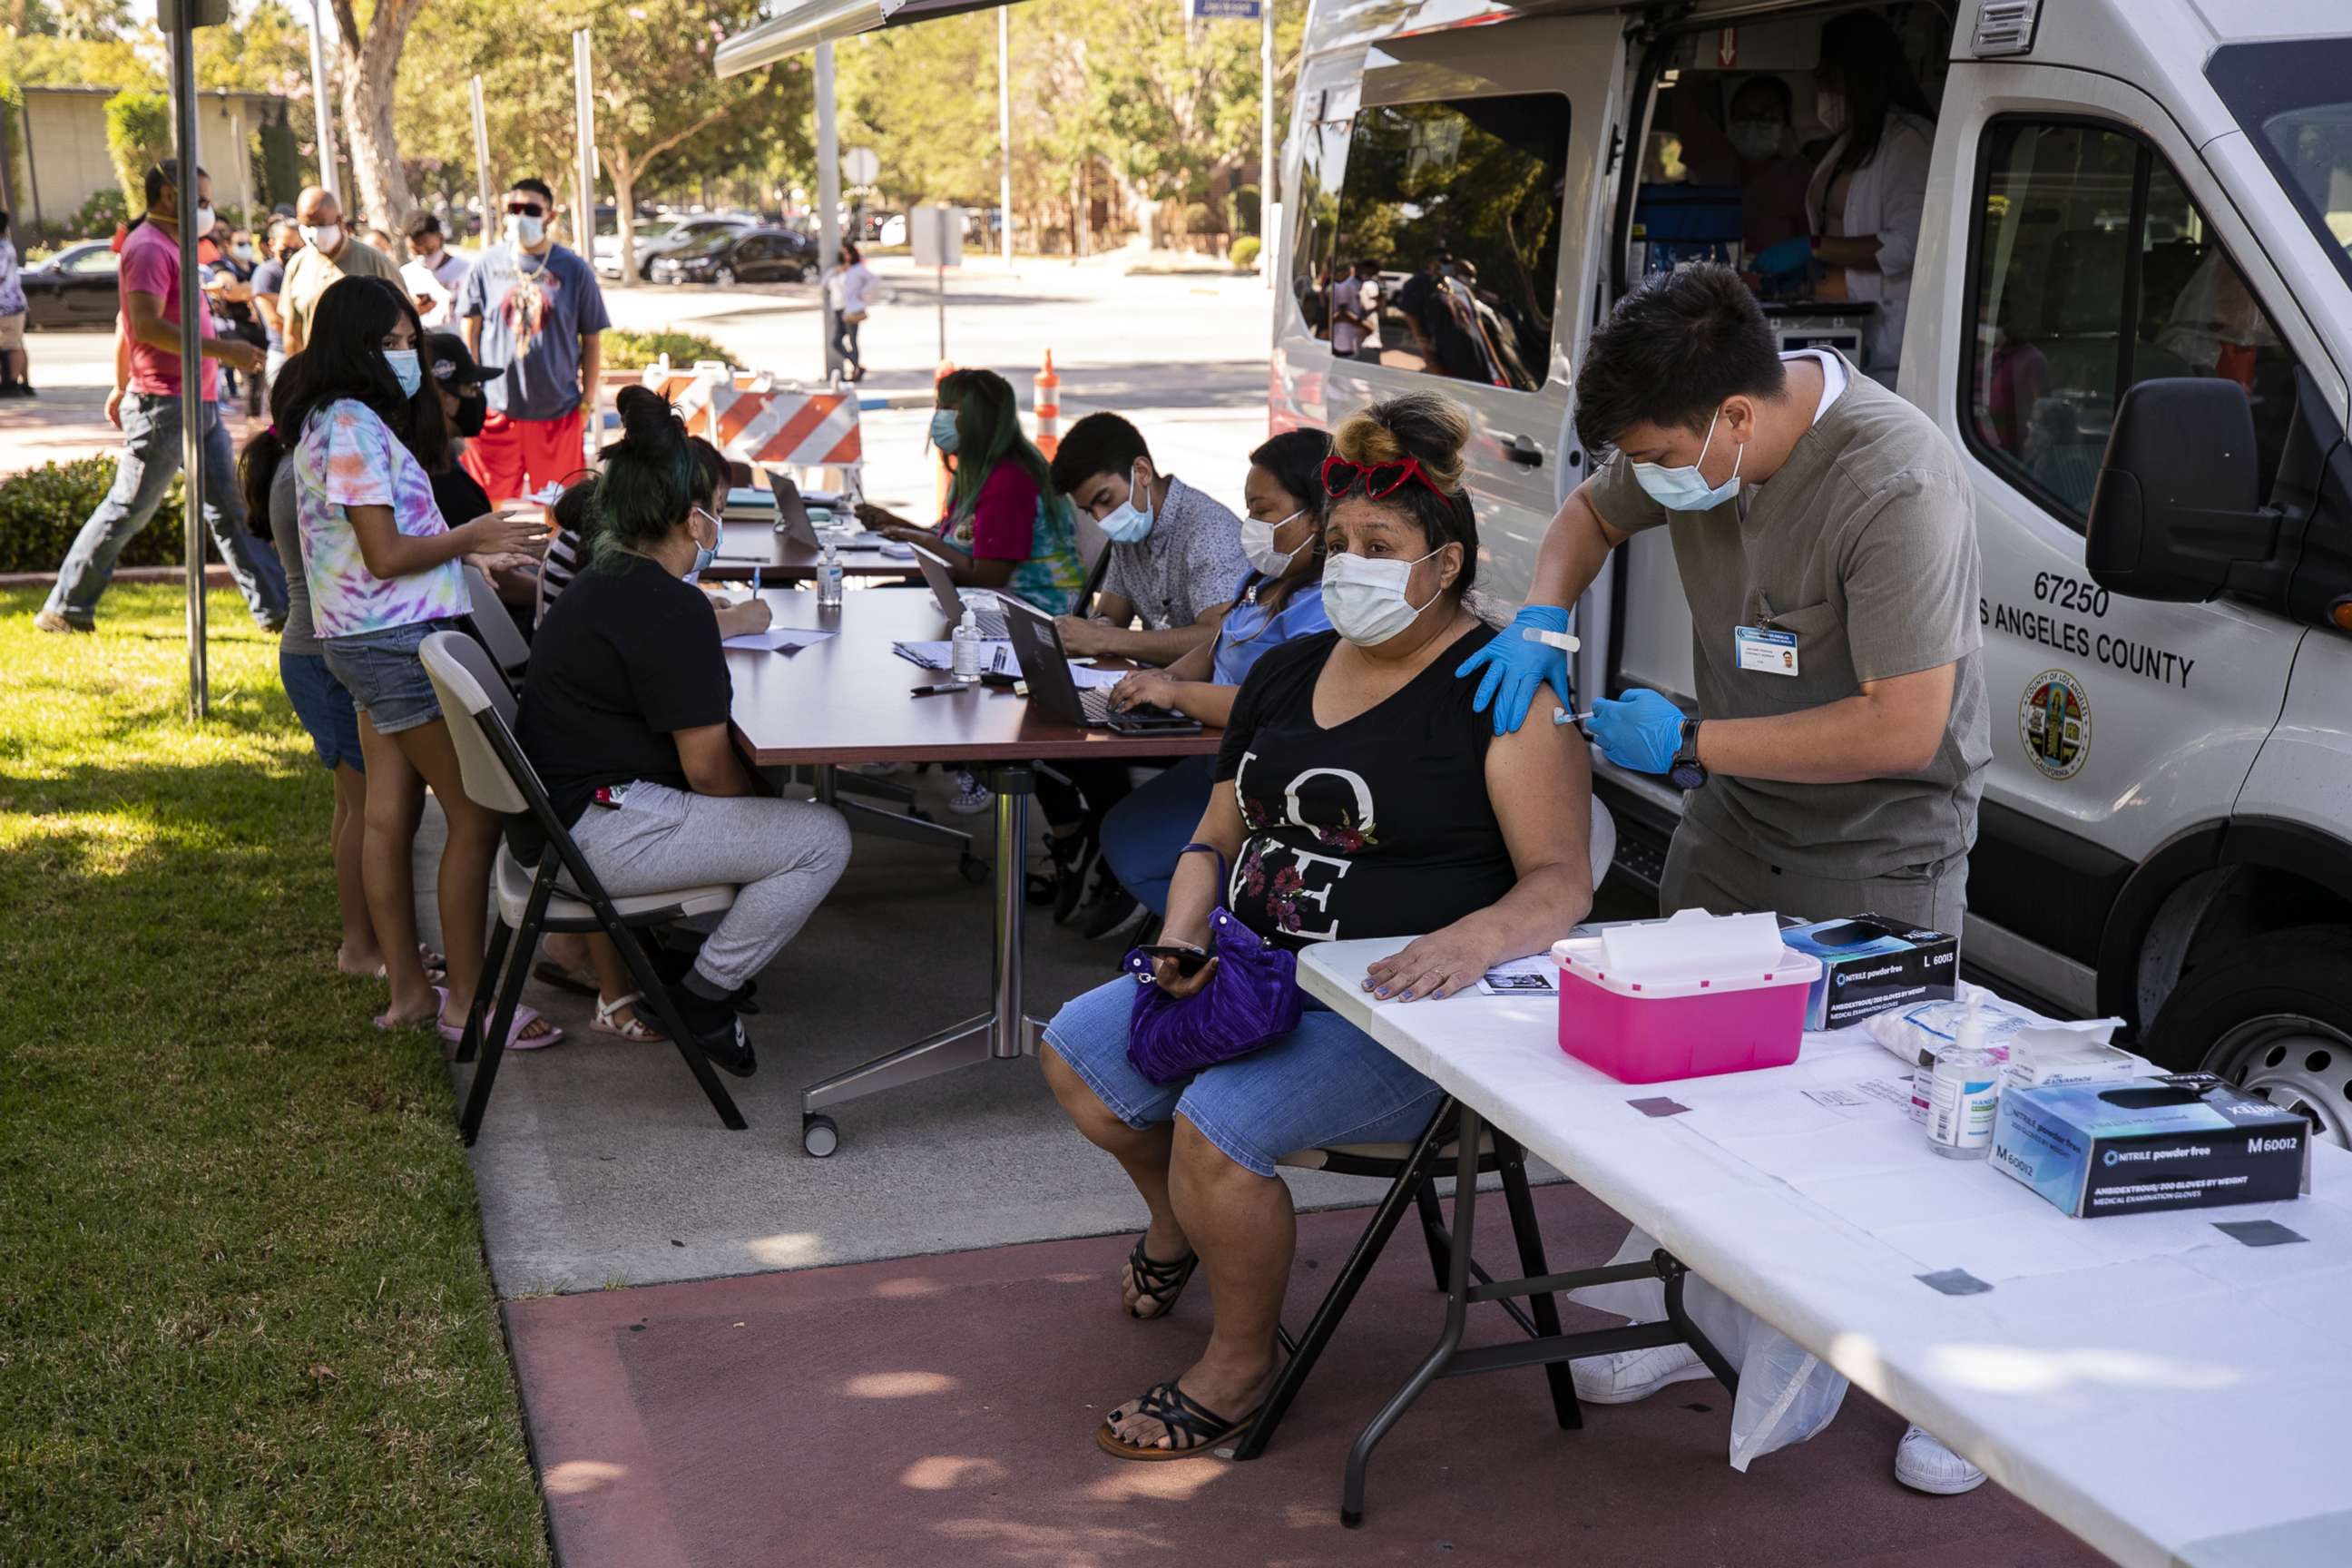 PHOTO: A woman gets vaccinated at a COVID-19 vaccination clinic in Paramount, Calif., Aug. 4, 2021.